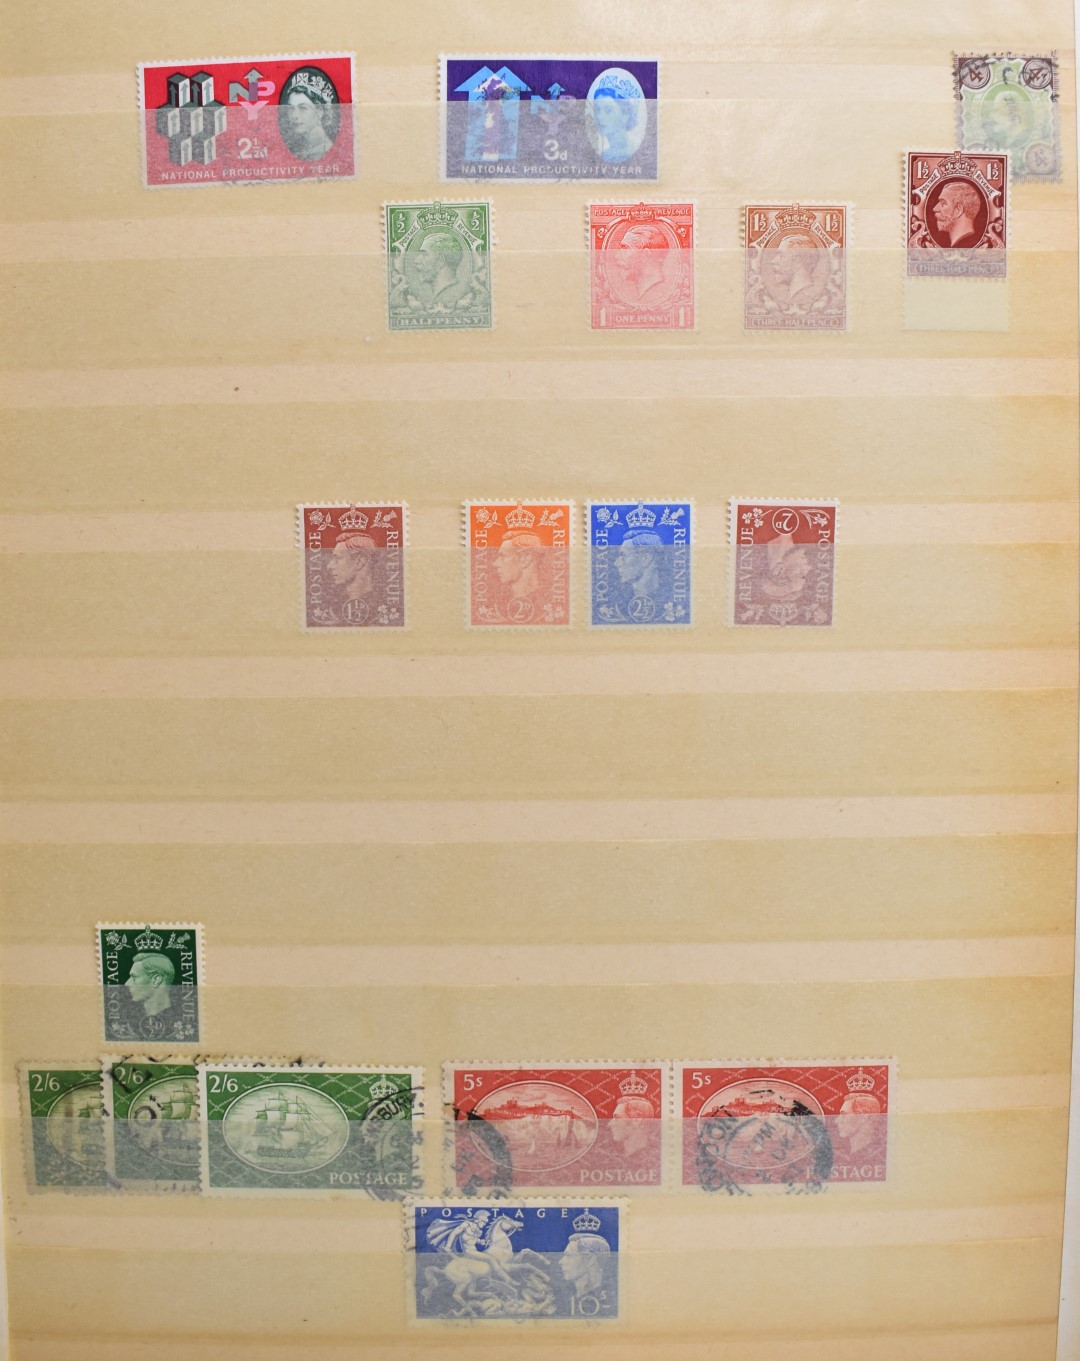 Mint and used GB stamp collection from 1840 1d black (on piece) to decimal modern Queen Elizabeth II - Image 3 of 31